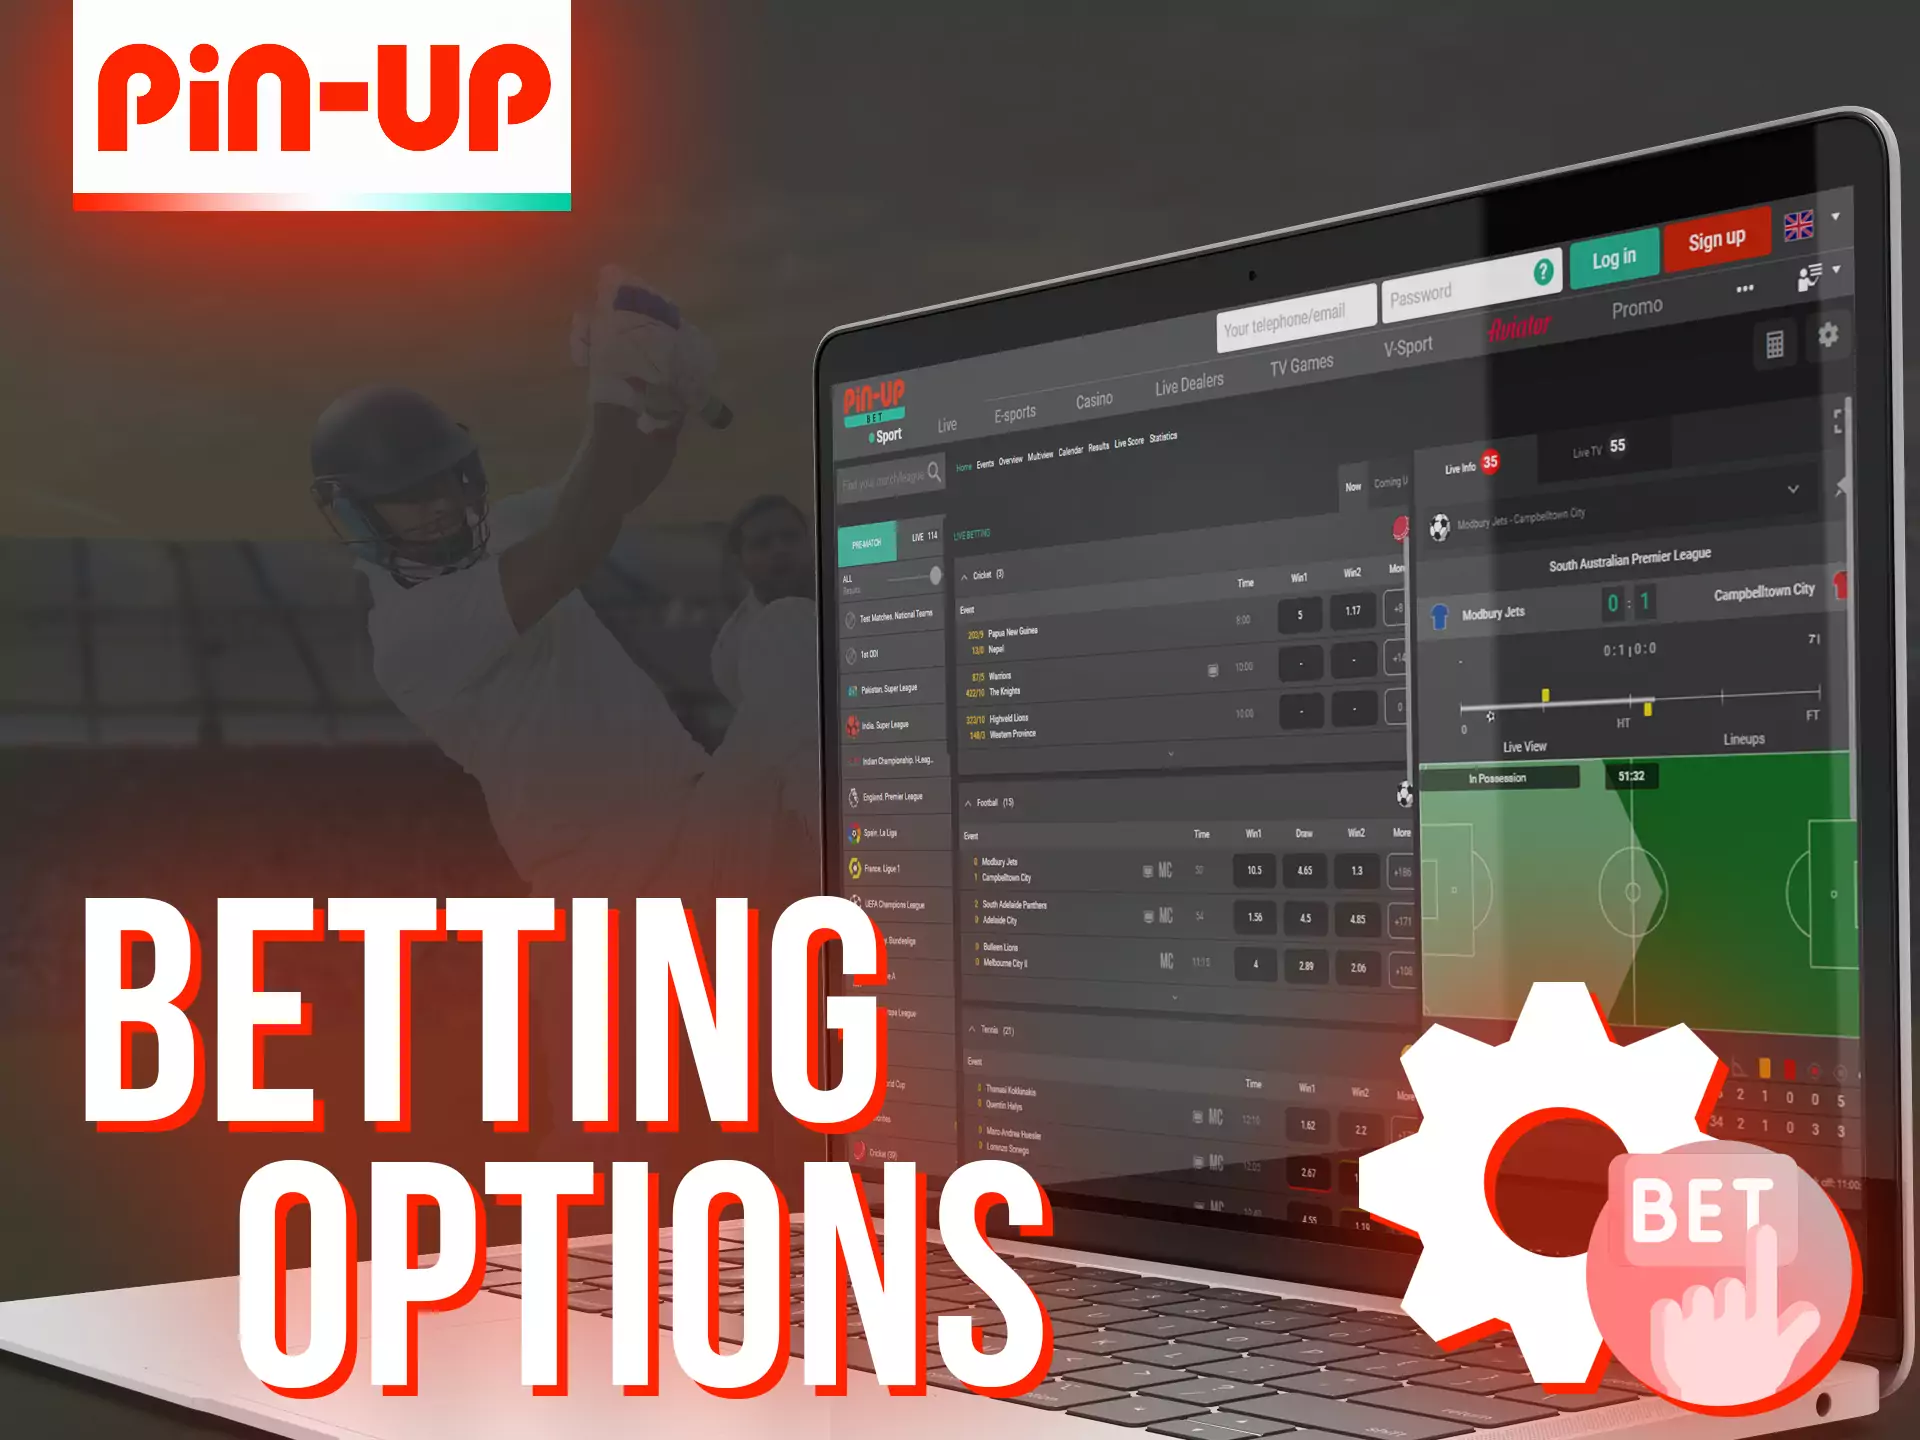 Pin-up has various options for sports betting.